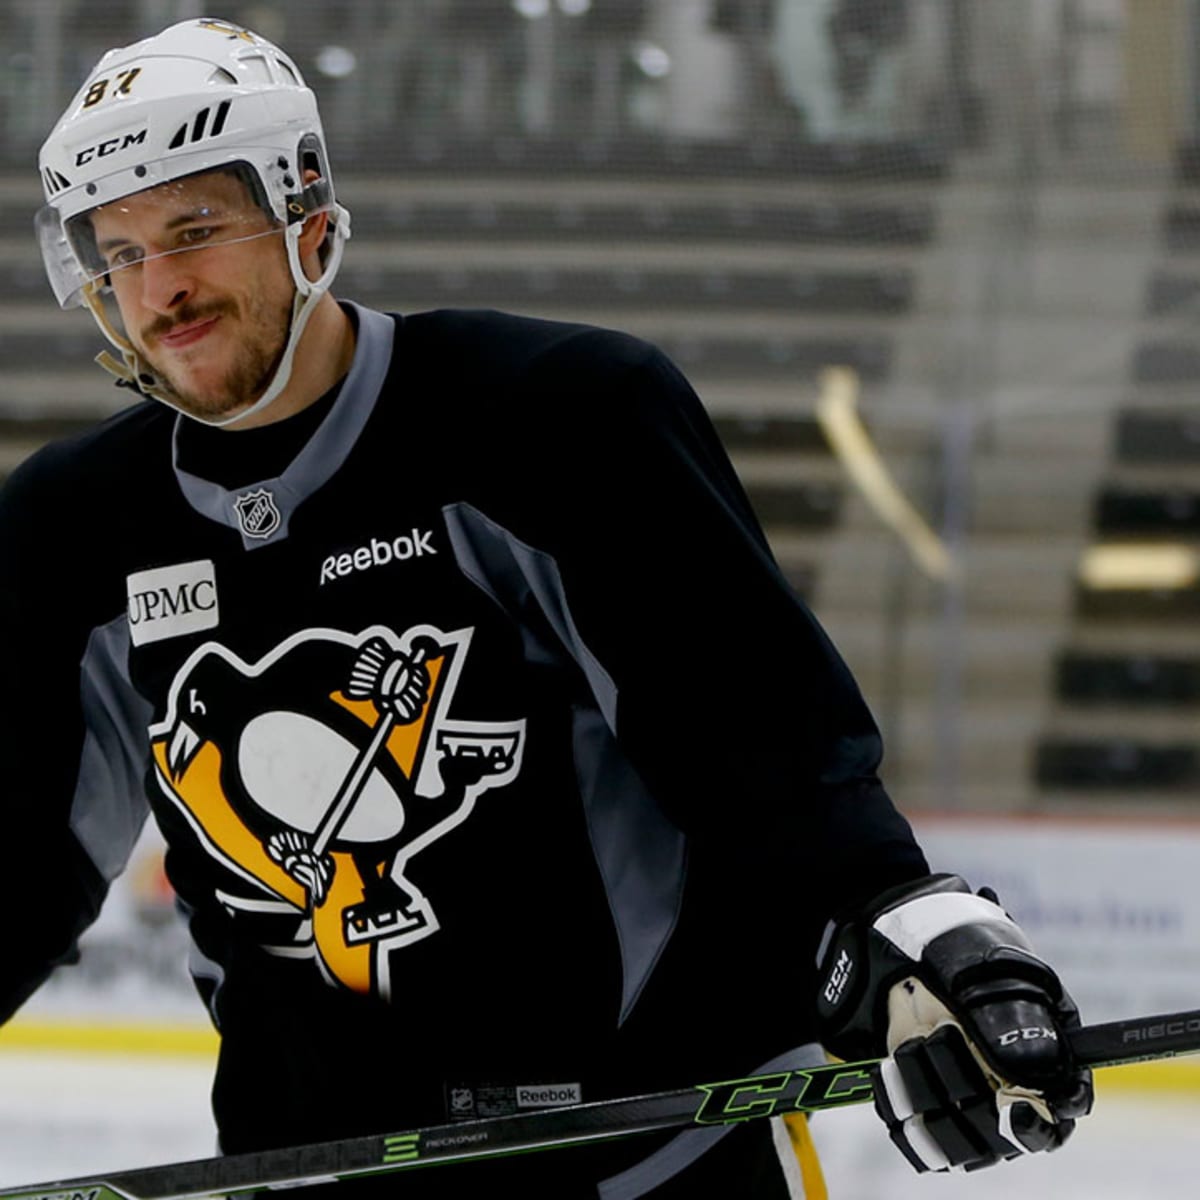 crosby working out  Hot hockey players, Pittsburgh penguins hockey,  Pittsburgh sports